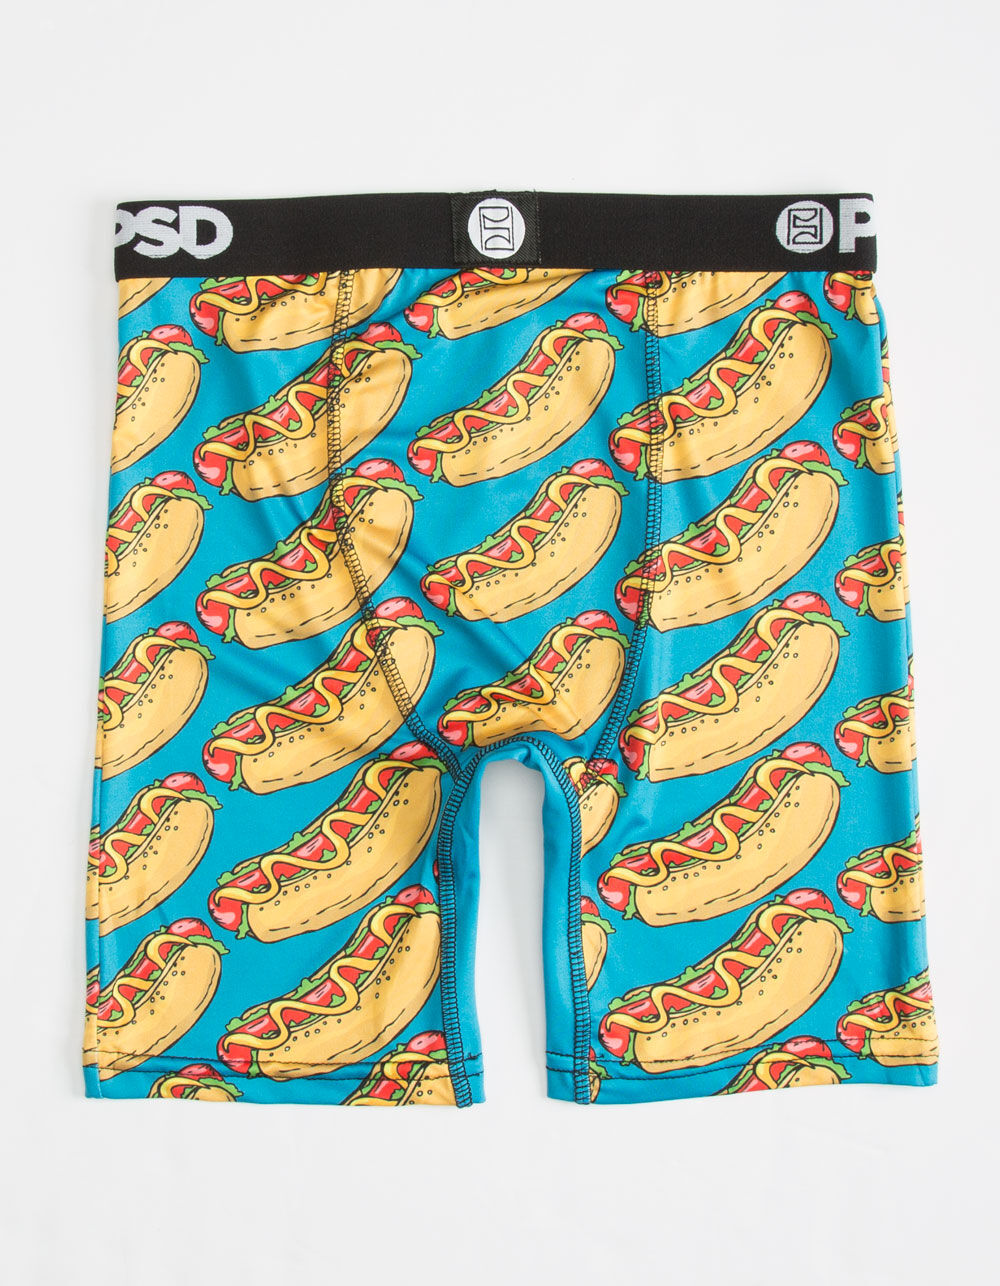 PSD Hot Dogs Boys Boxer Briefs image number 1